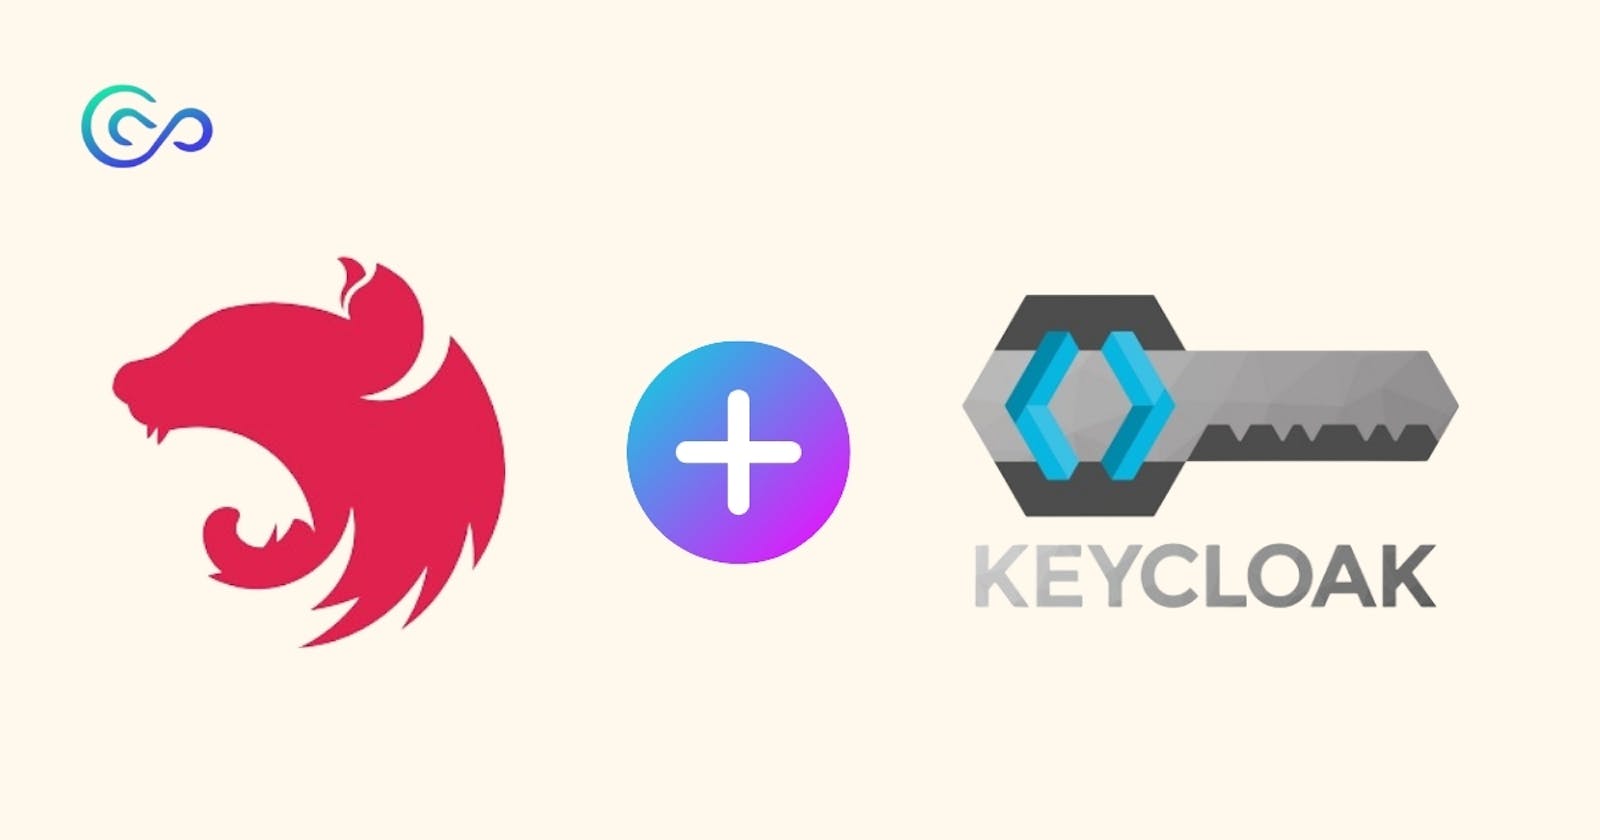 How to set up Keycloak with NestJS?